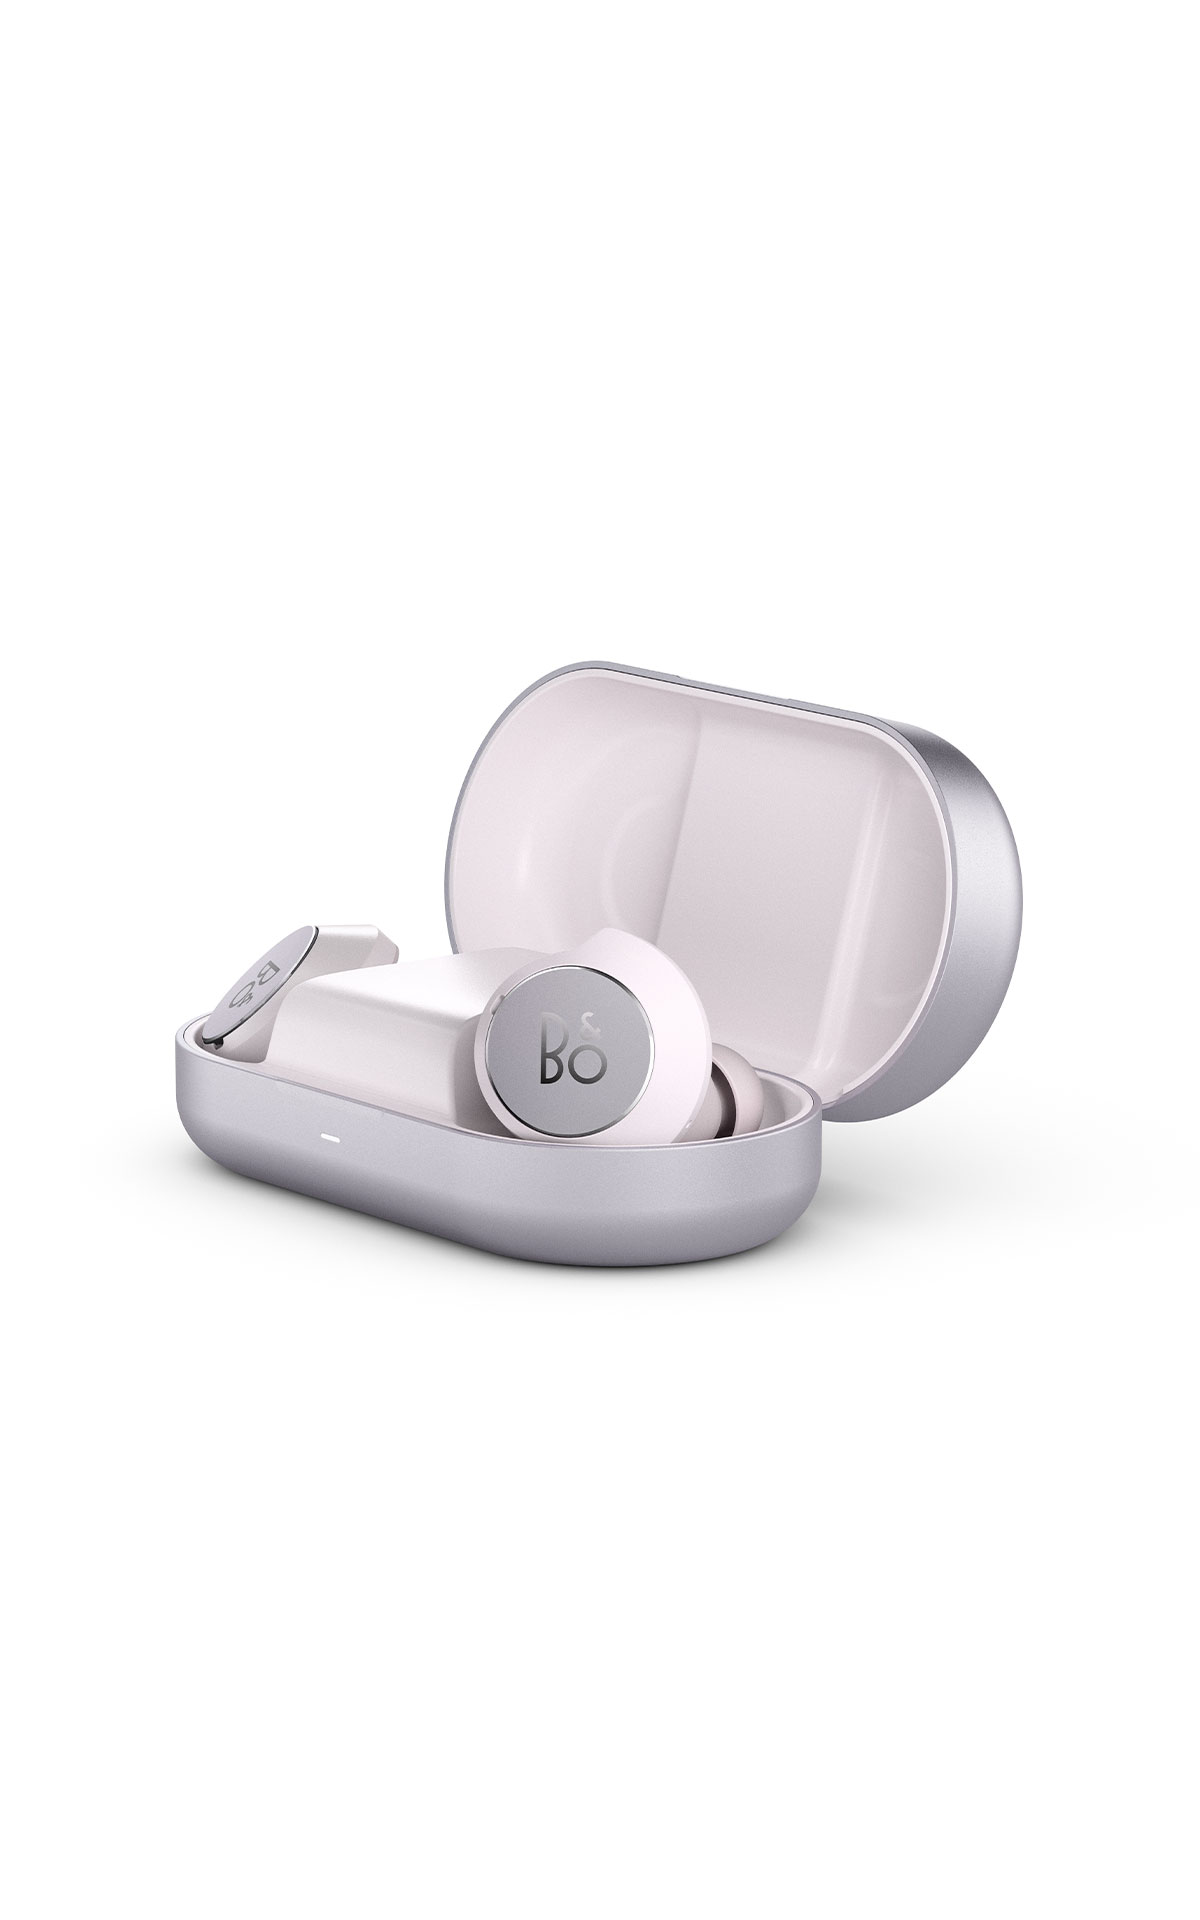 Bang & Olufsen Beoplay EQ headphones from Bicester Village